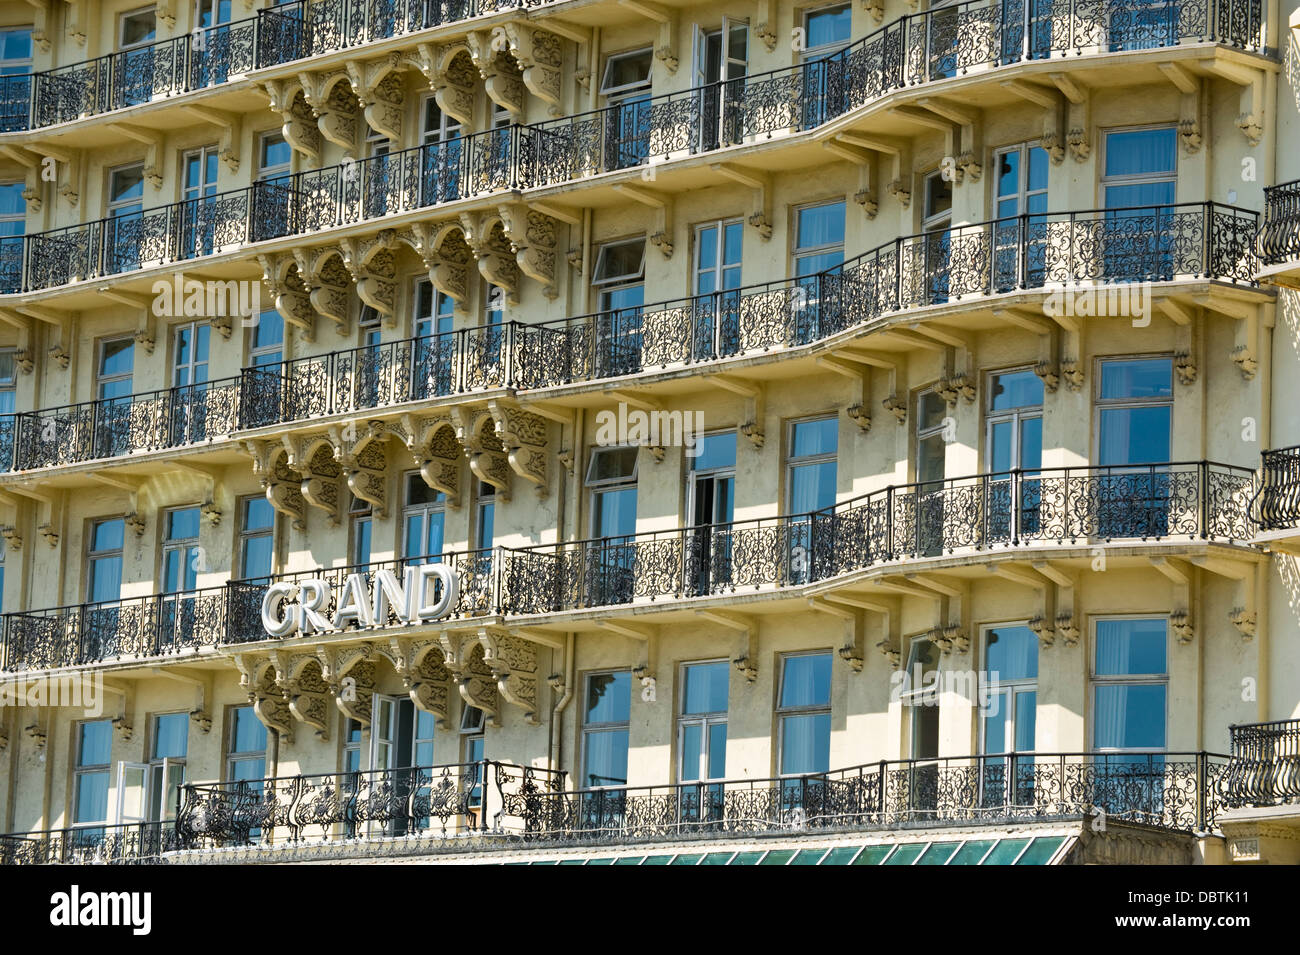 Grand Hotel on seafront in Brighton East Sussex England UK Stock Photo